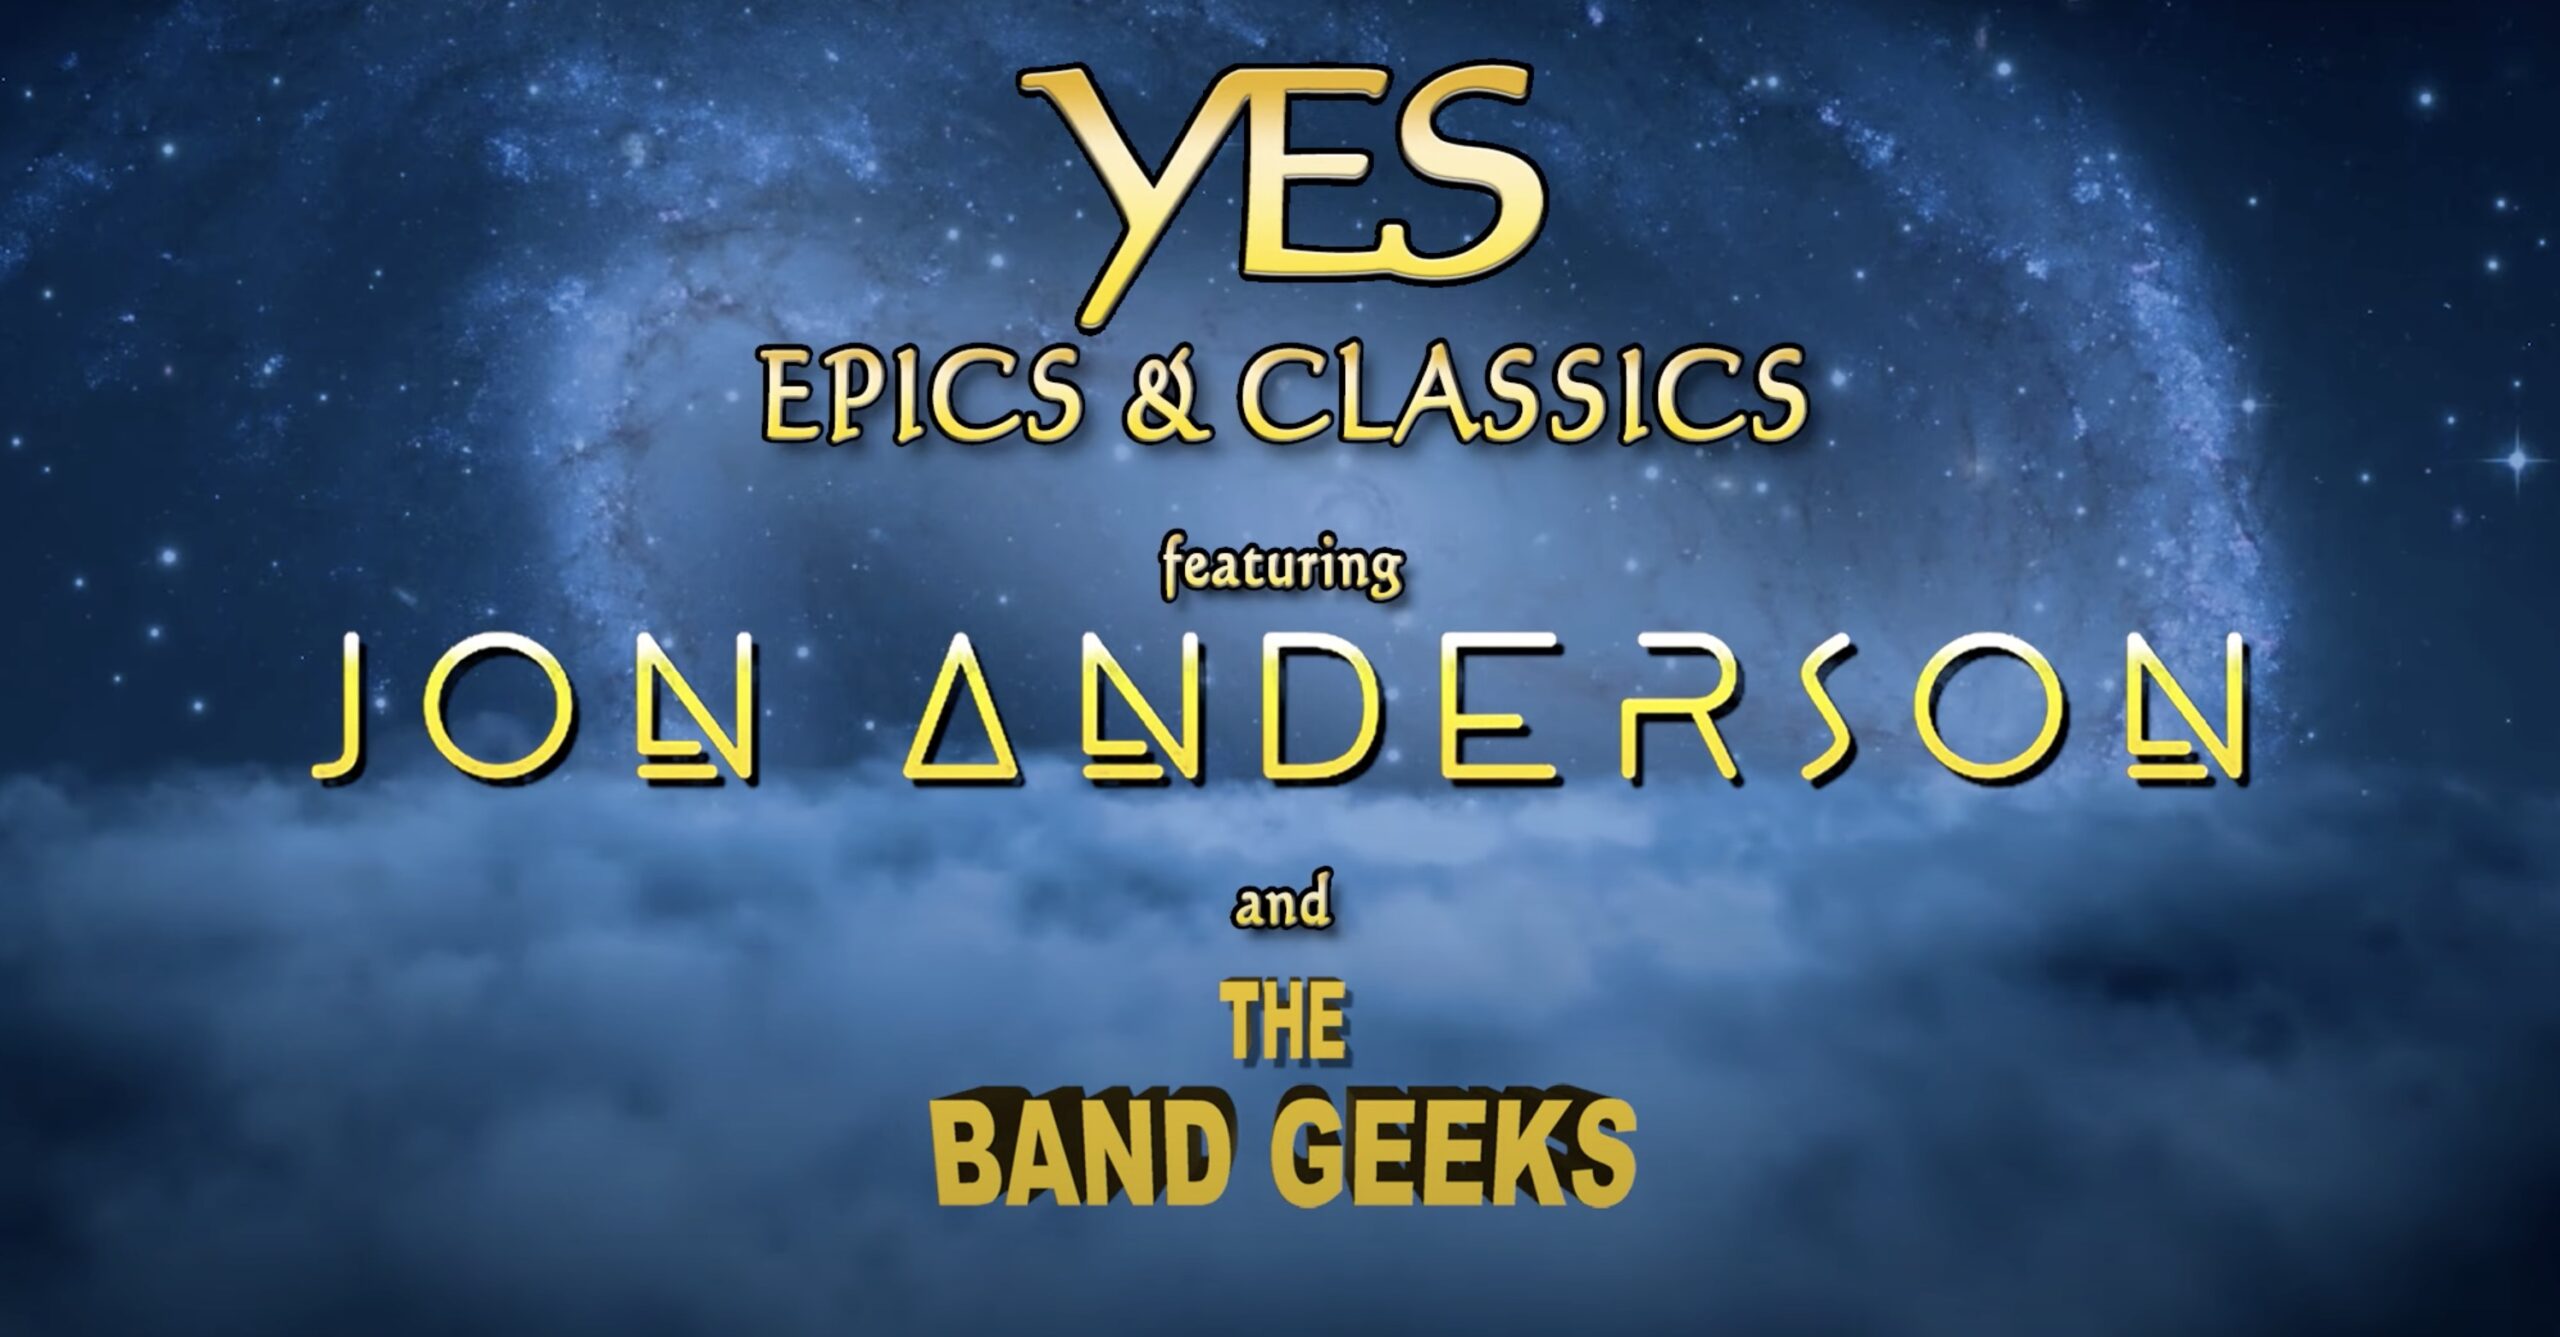 YES Legend Jon Anderson To Tour With The Band Geeks Spring 2023! The